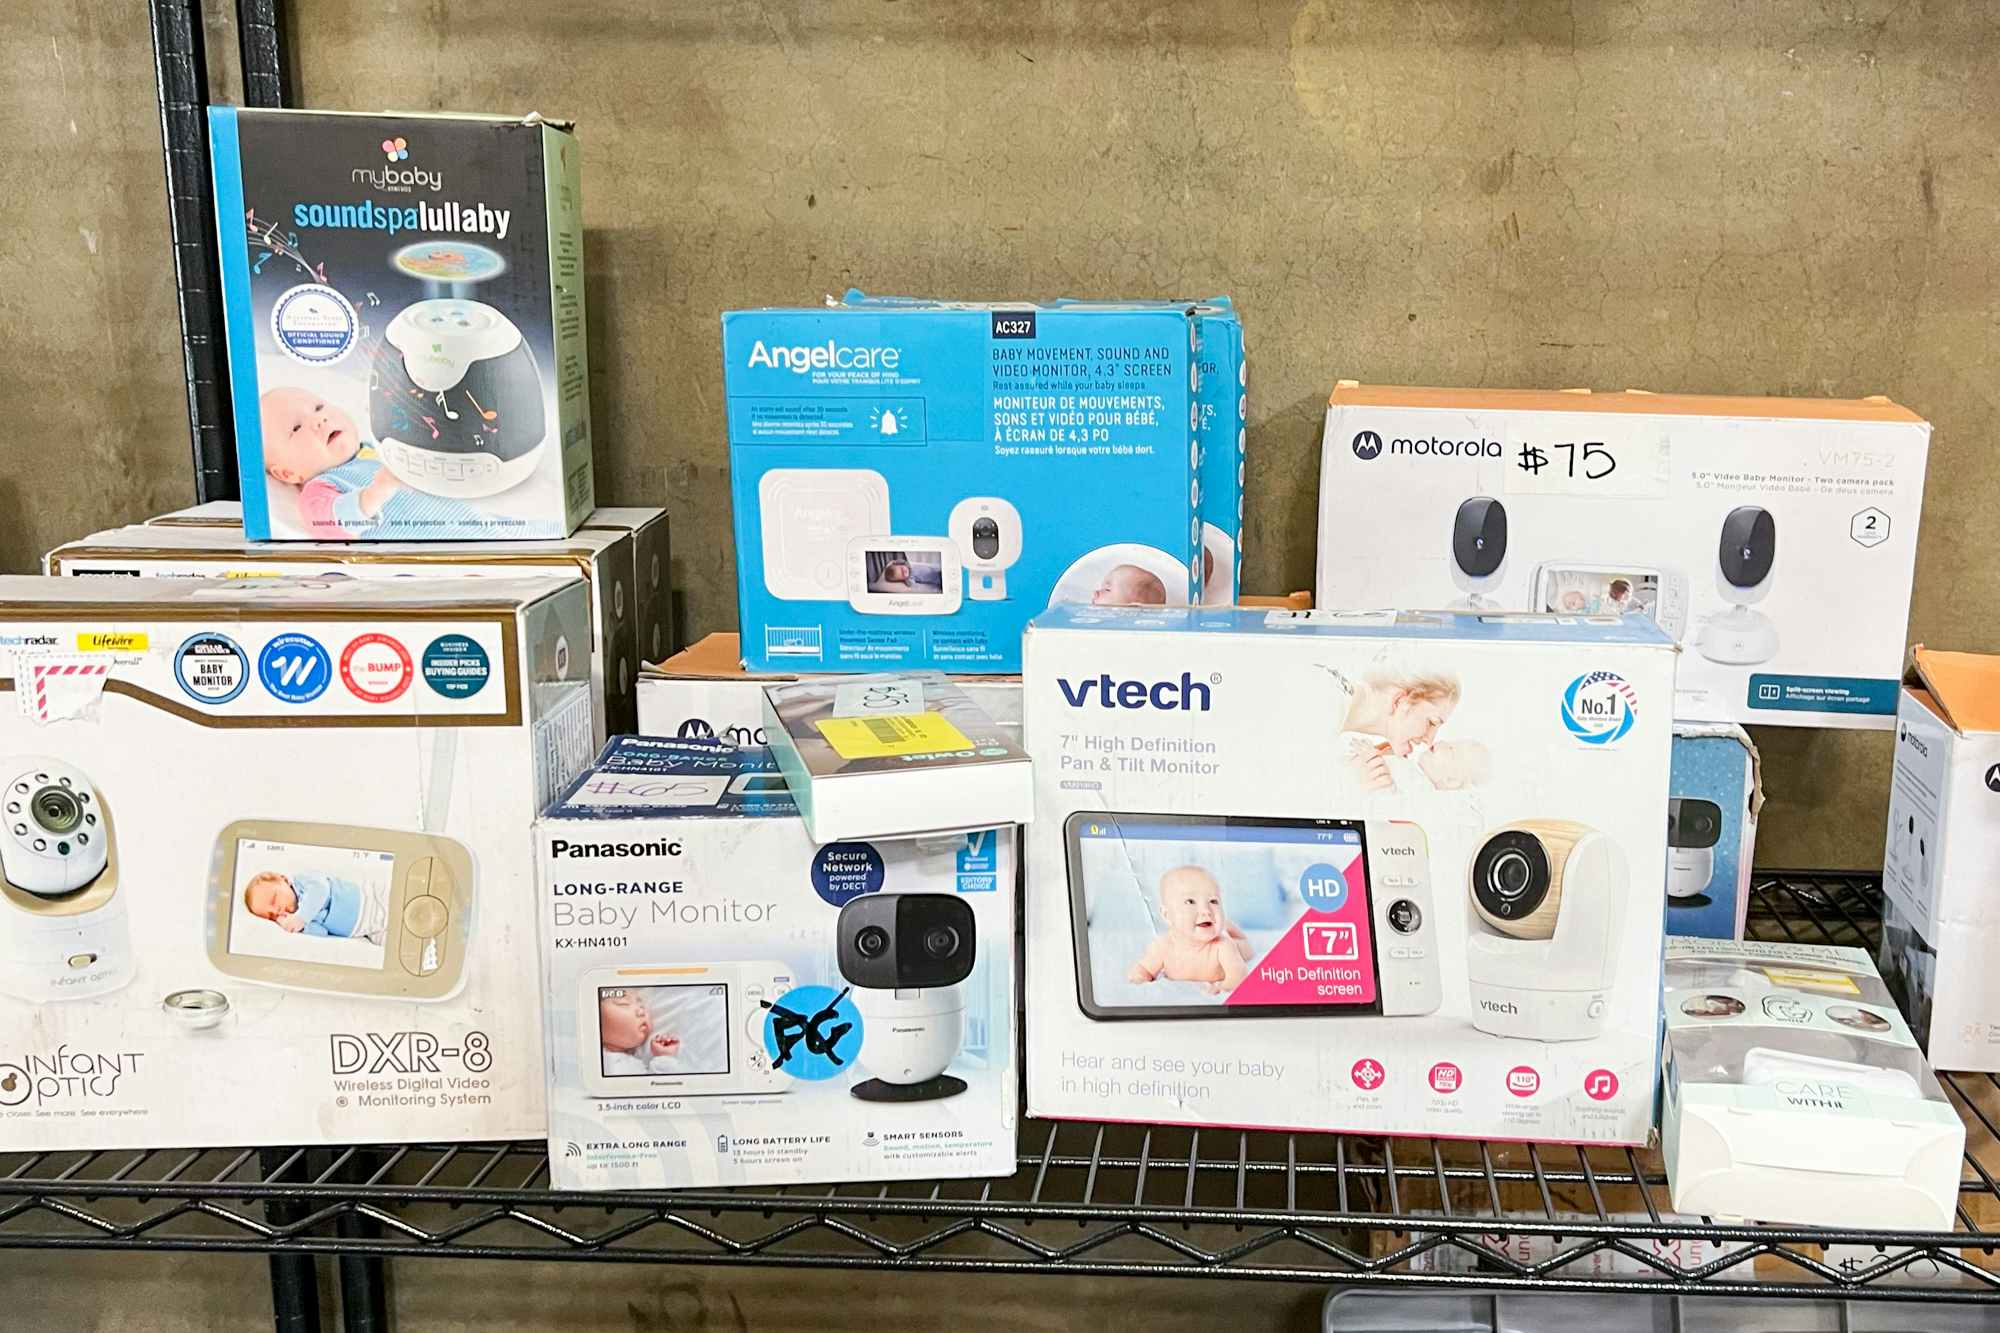 Some baby monitors and equipment for sale at a liquidation store